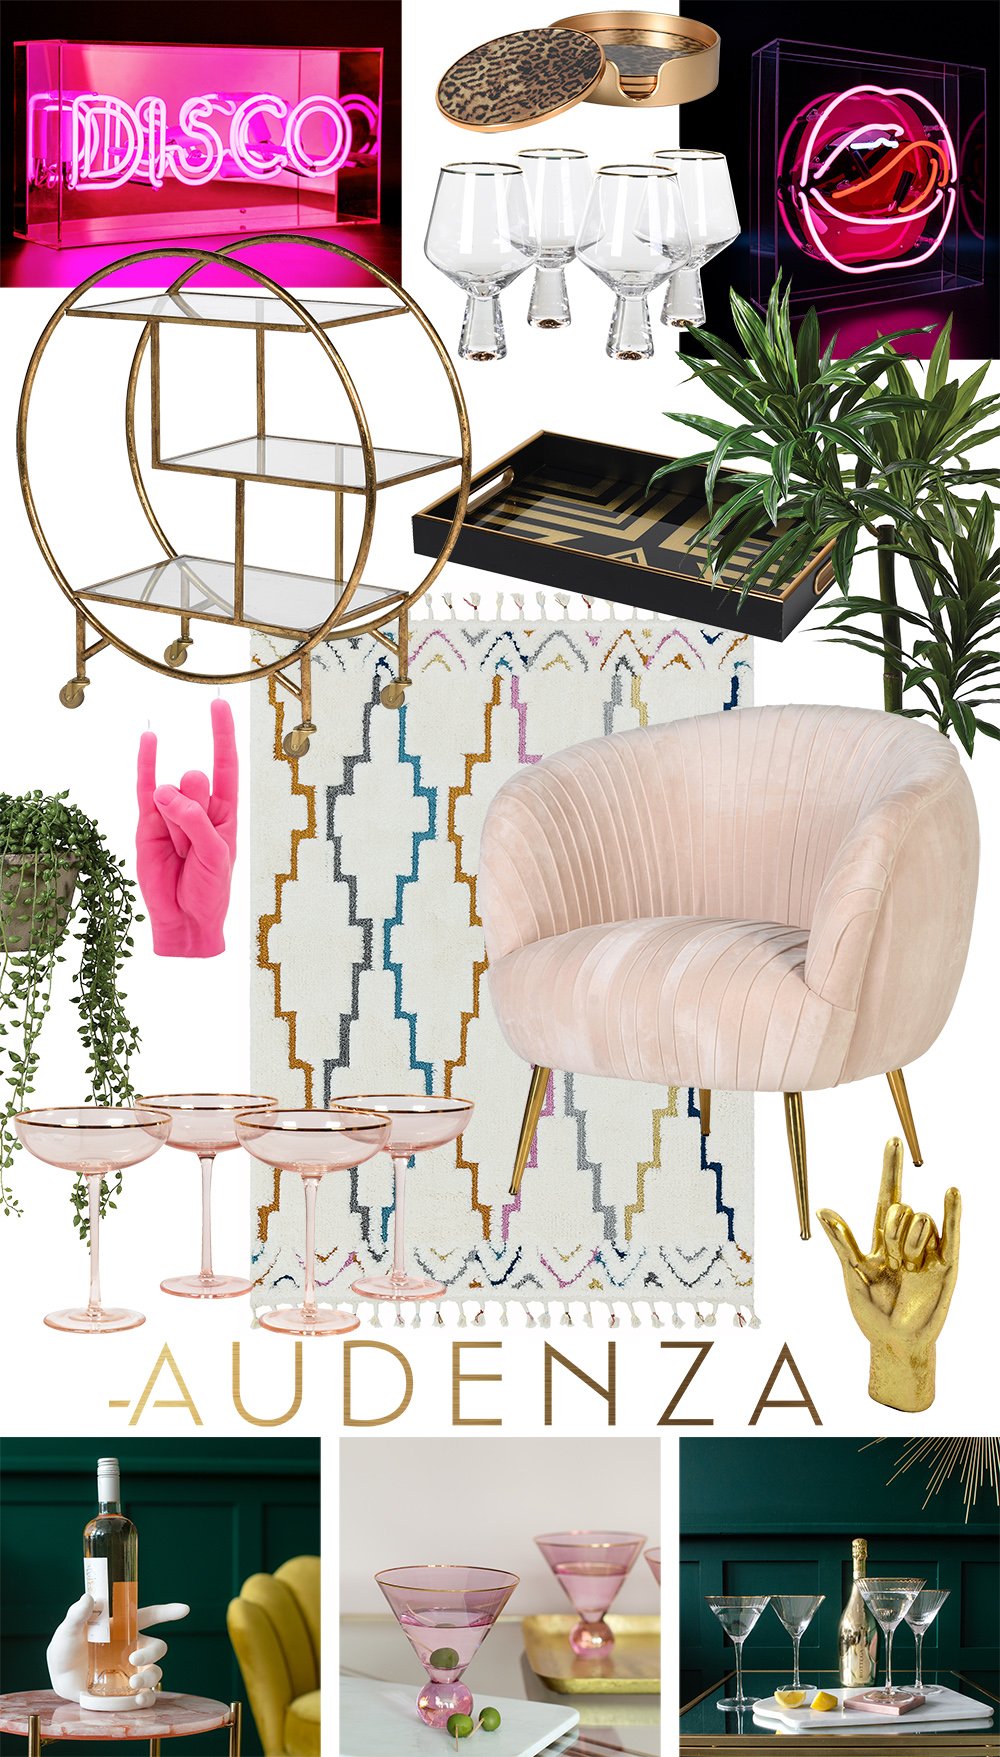 Everything you need to style your own home bar from Audenza. From cool glassware, to neon lights, to bar carts.